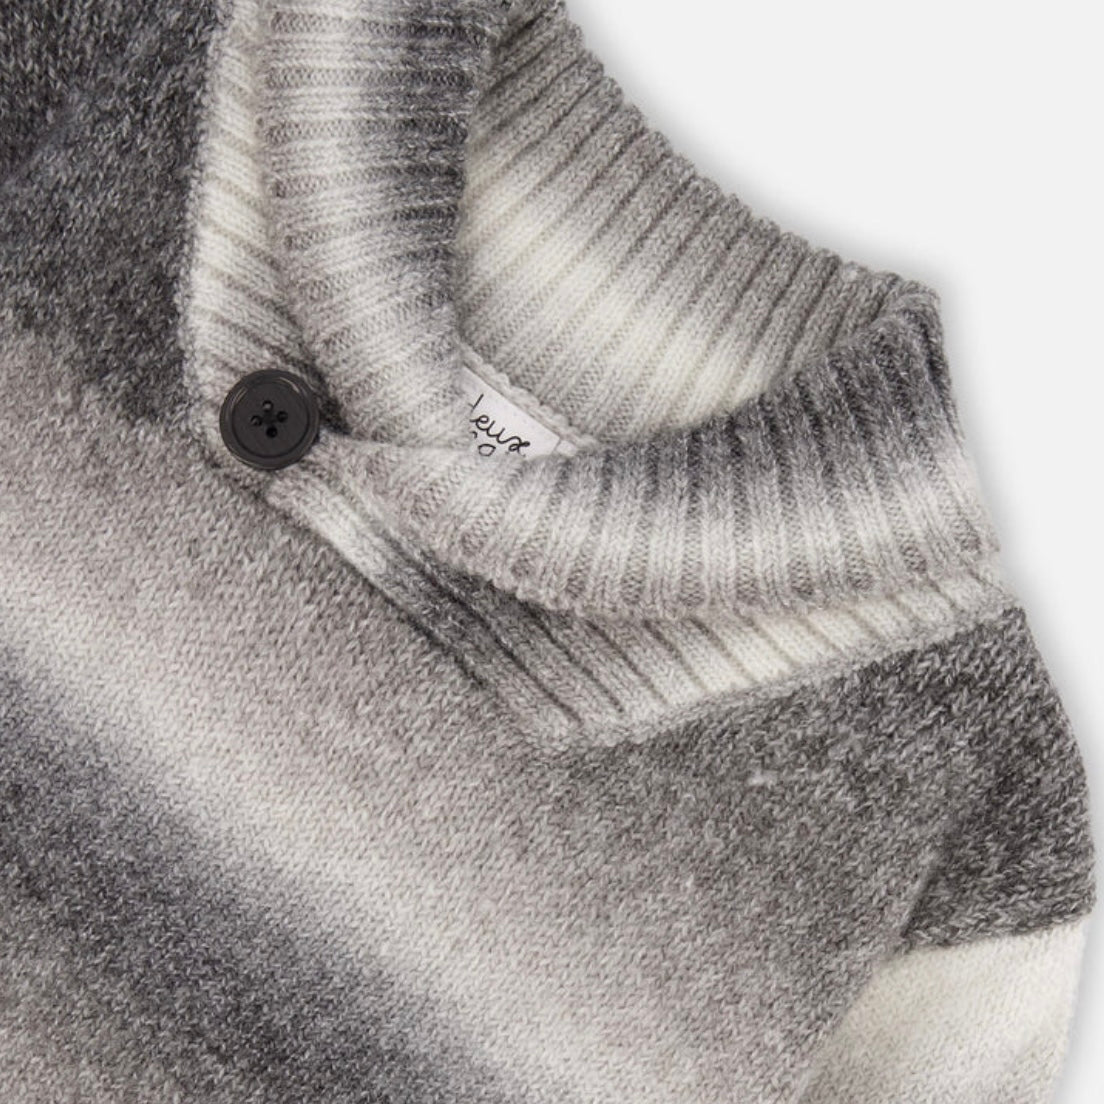 Gray Gradient Sweater with Collar